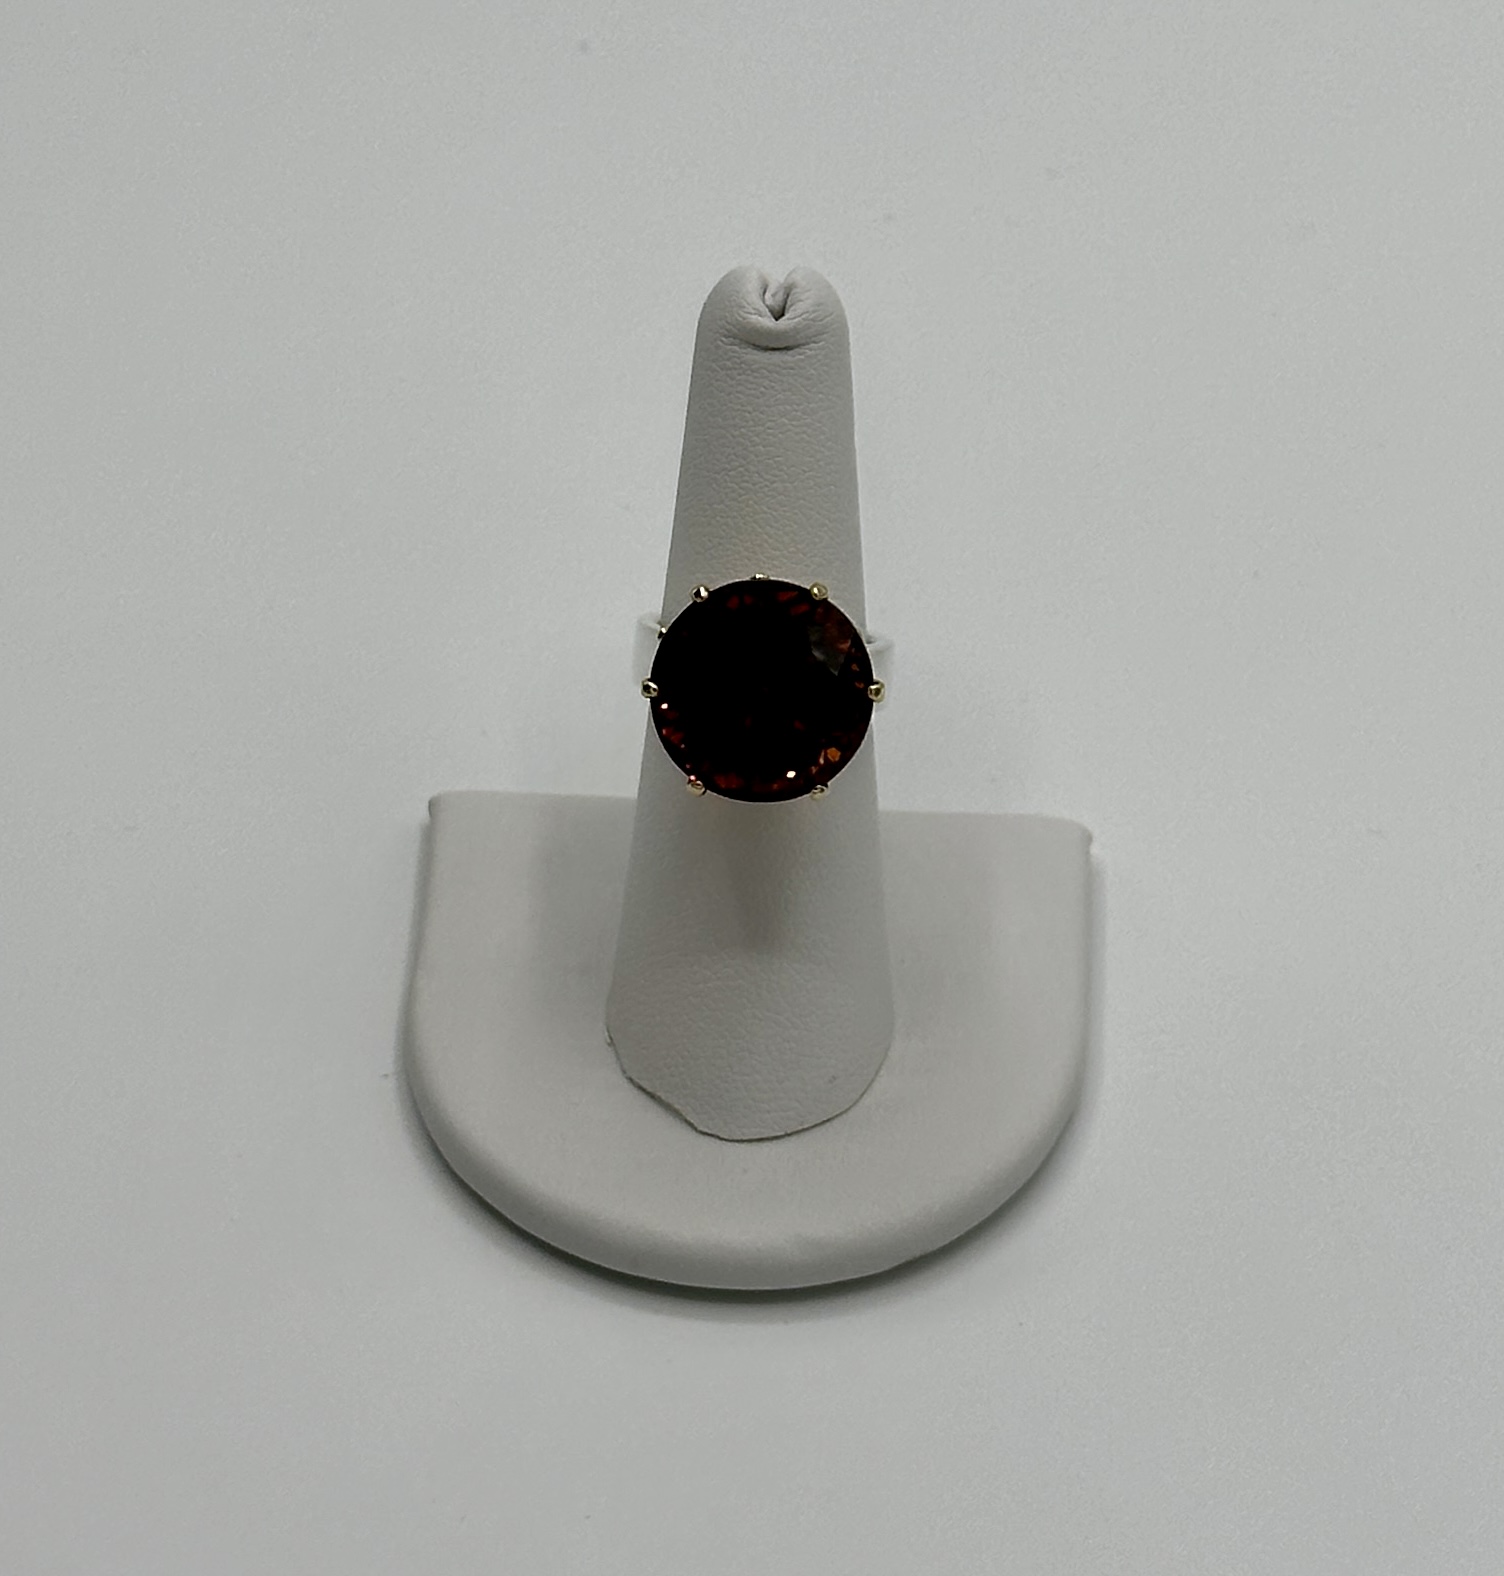 925 Silver Sterling Ring with Giant, Garnet, Stone, Ballast, Weighted, and Hand Cast using Lost Wax Method